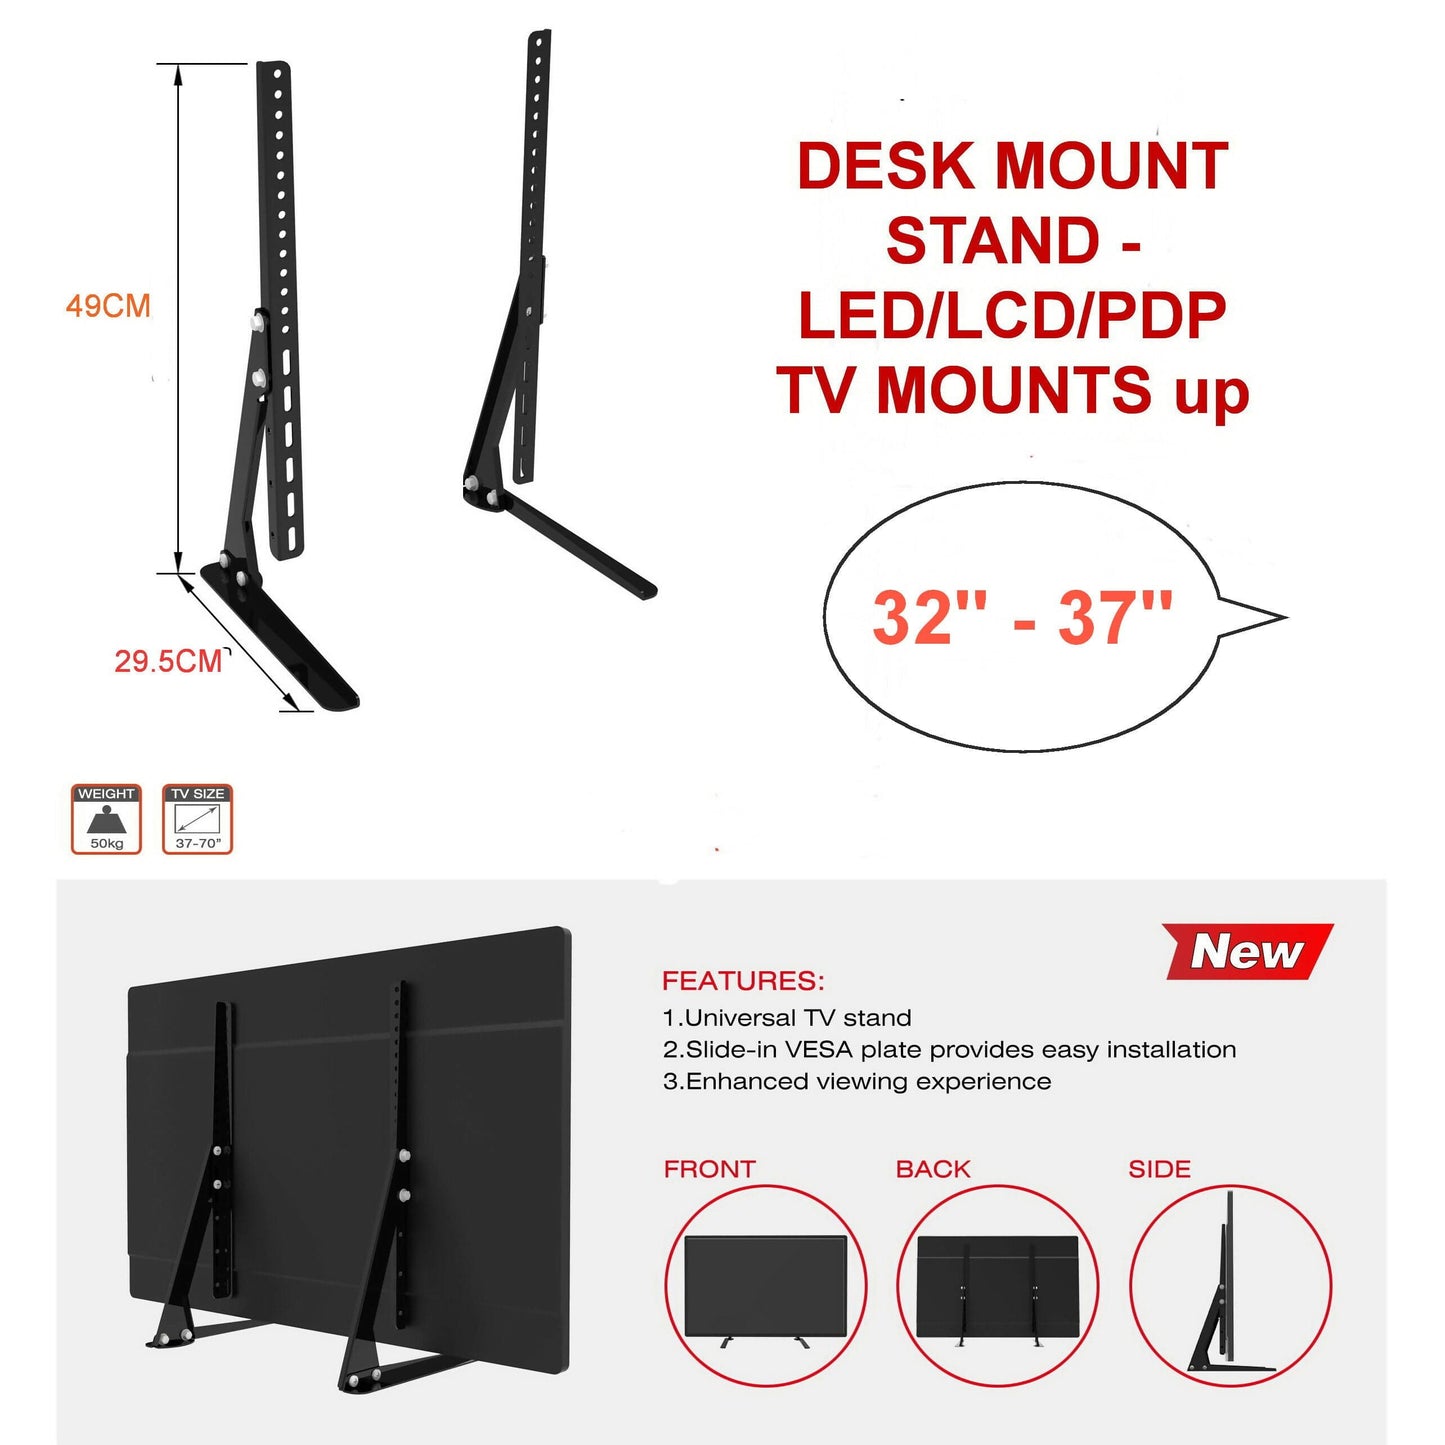 Provideolb Television Stands Conqueror Desk Mount Stand for LED, LCD, Plasma TV 26" To 37" - D300